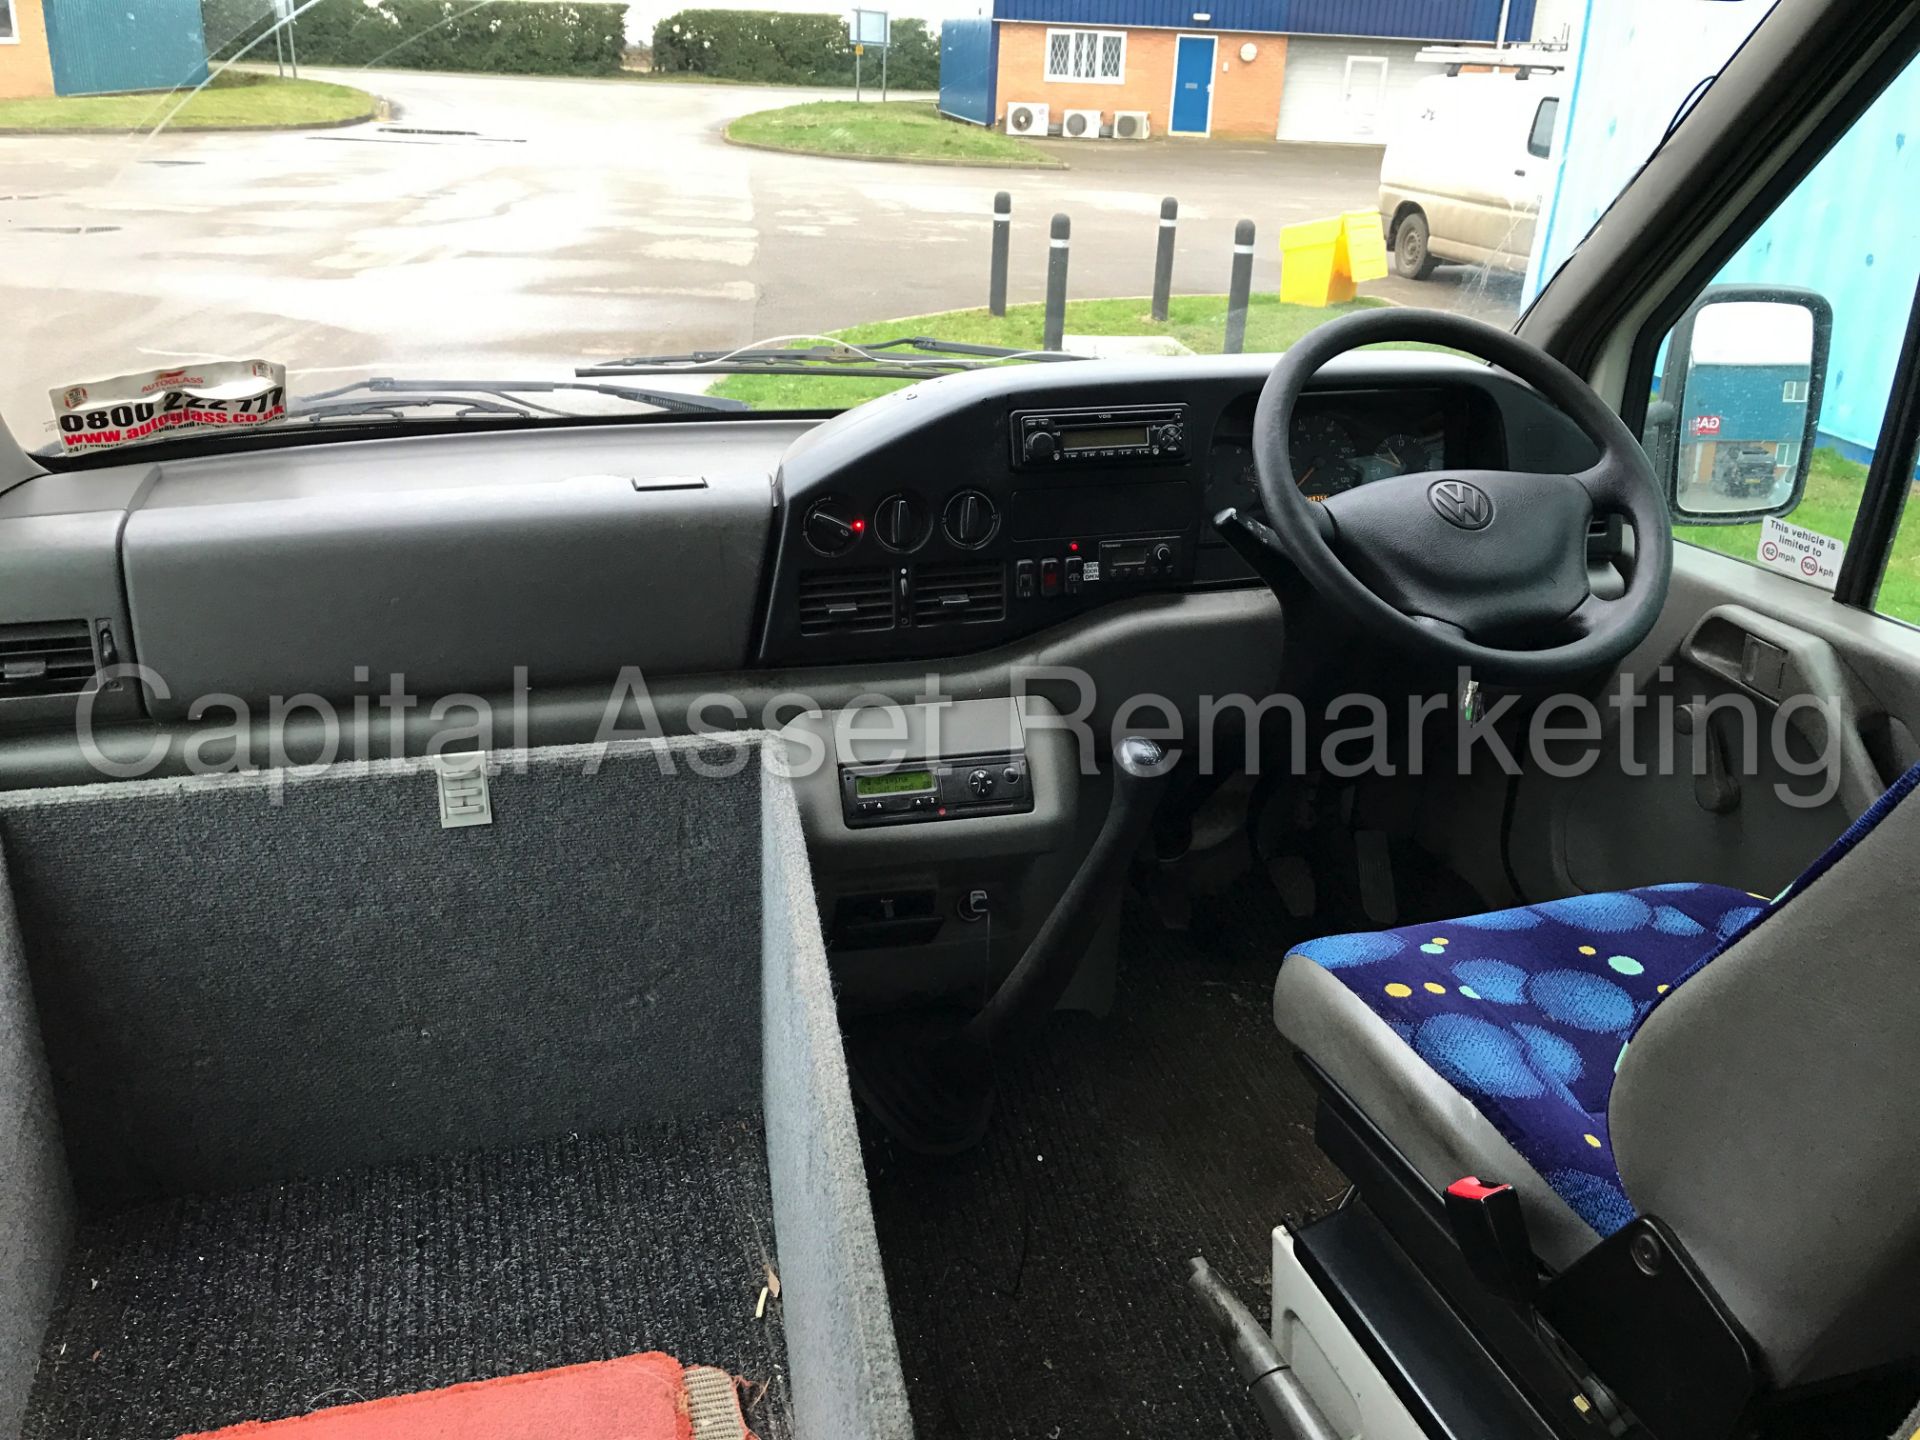 (On Sale) VOLKSWAGEN LT 46 '15 SEATER BUS / COACH' (2007 MODEL) '2.5 TDI - LWB - COIF' **VERY RARE** - Image 10 of 17